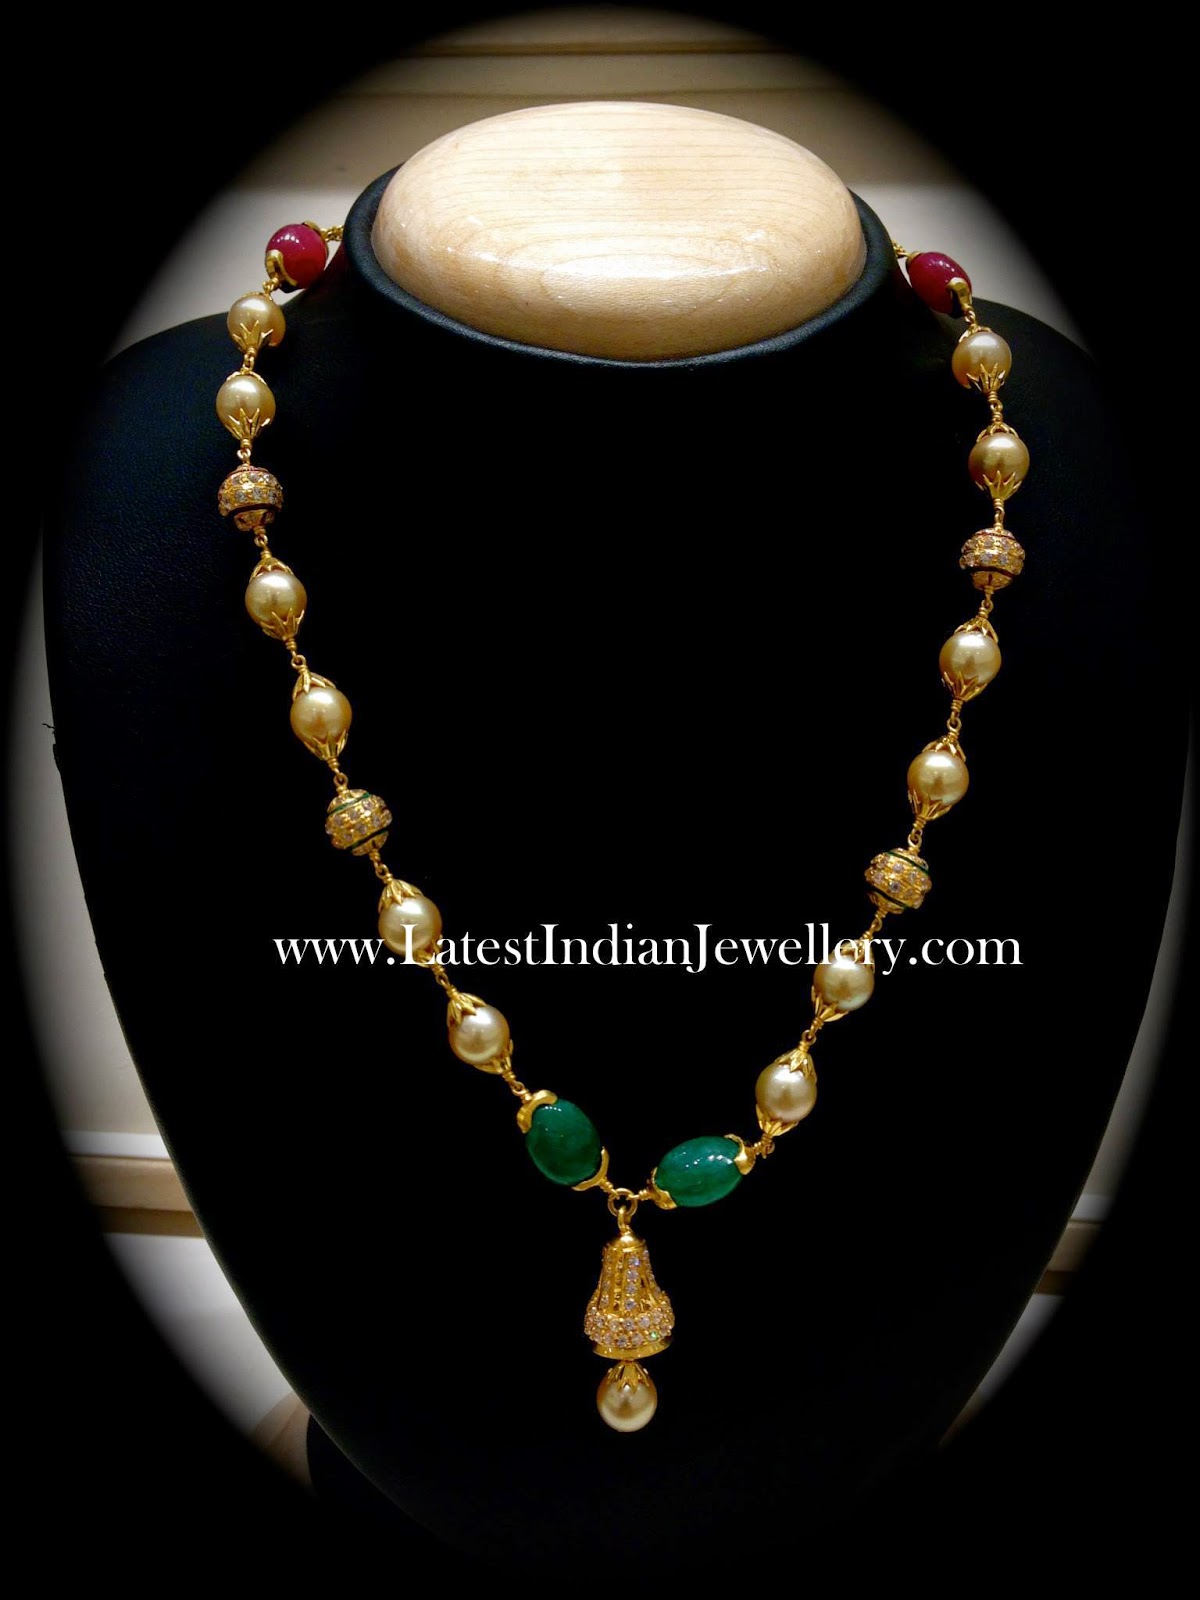 South Sea Pearls Beads Chain - Latest Indian Jewellery Designs